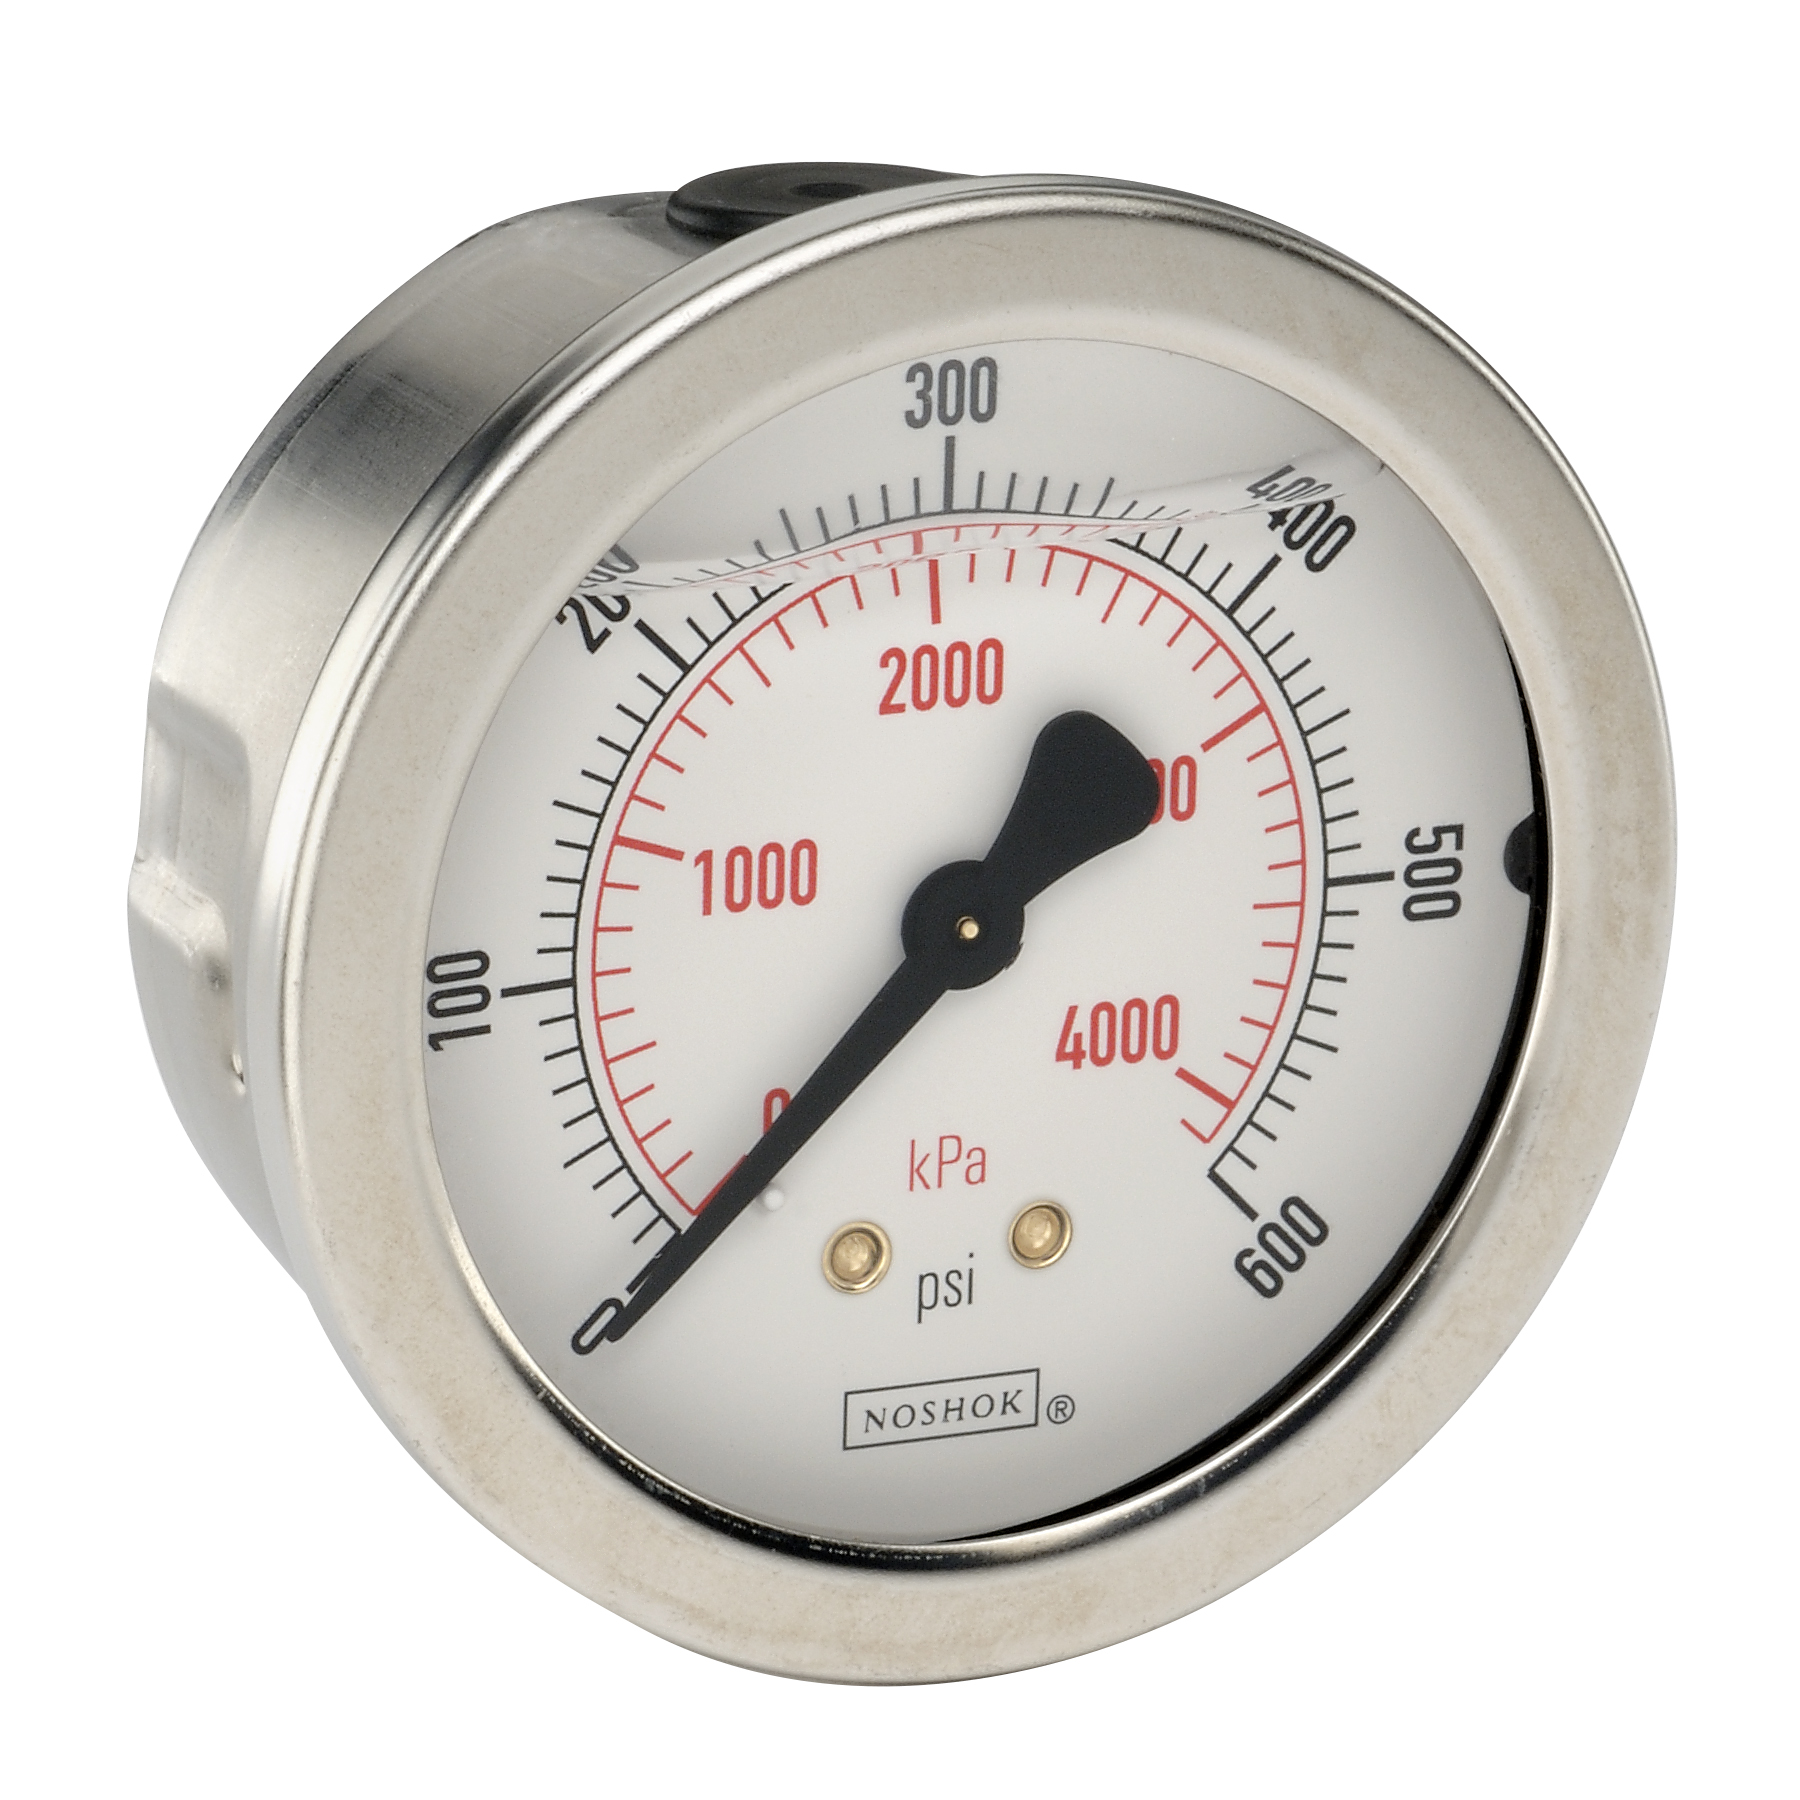 25-911-SST-3000-psi/kPa-GY40 900 Series ABS and Stainless Steel Liquid Filled Pressure Gauges